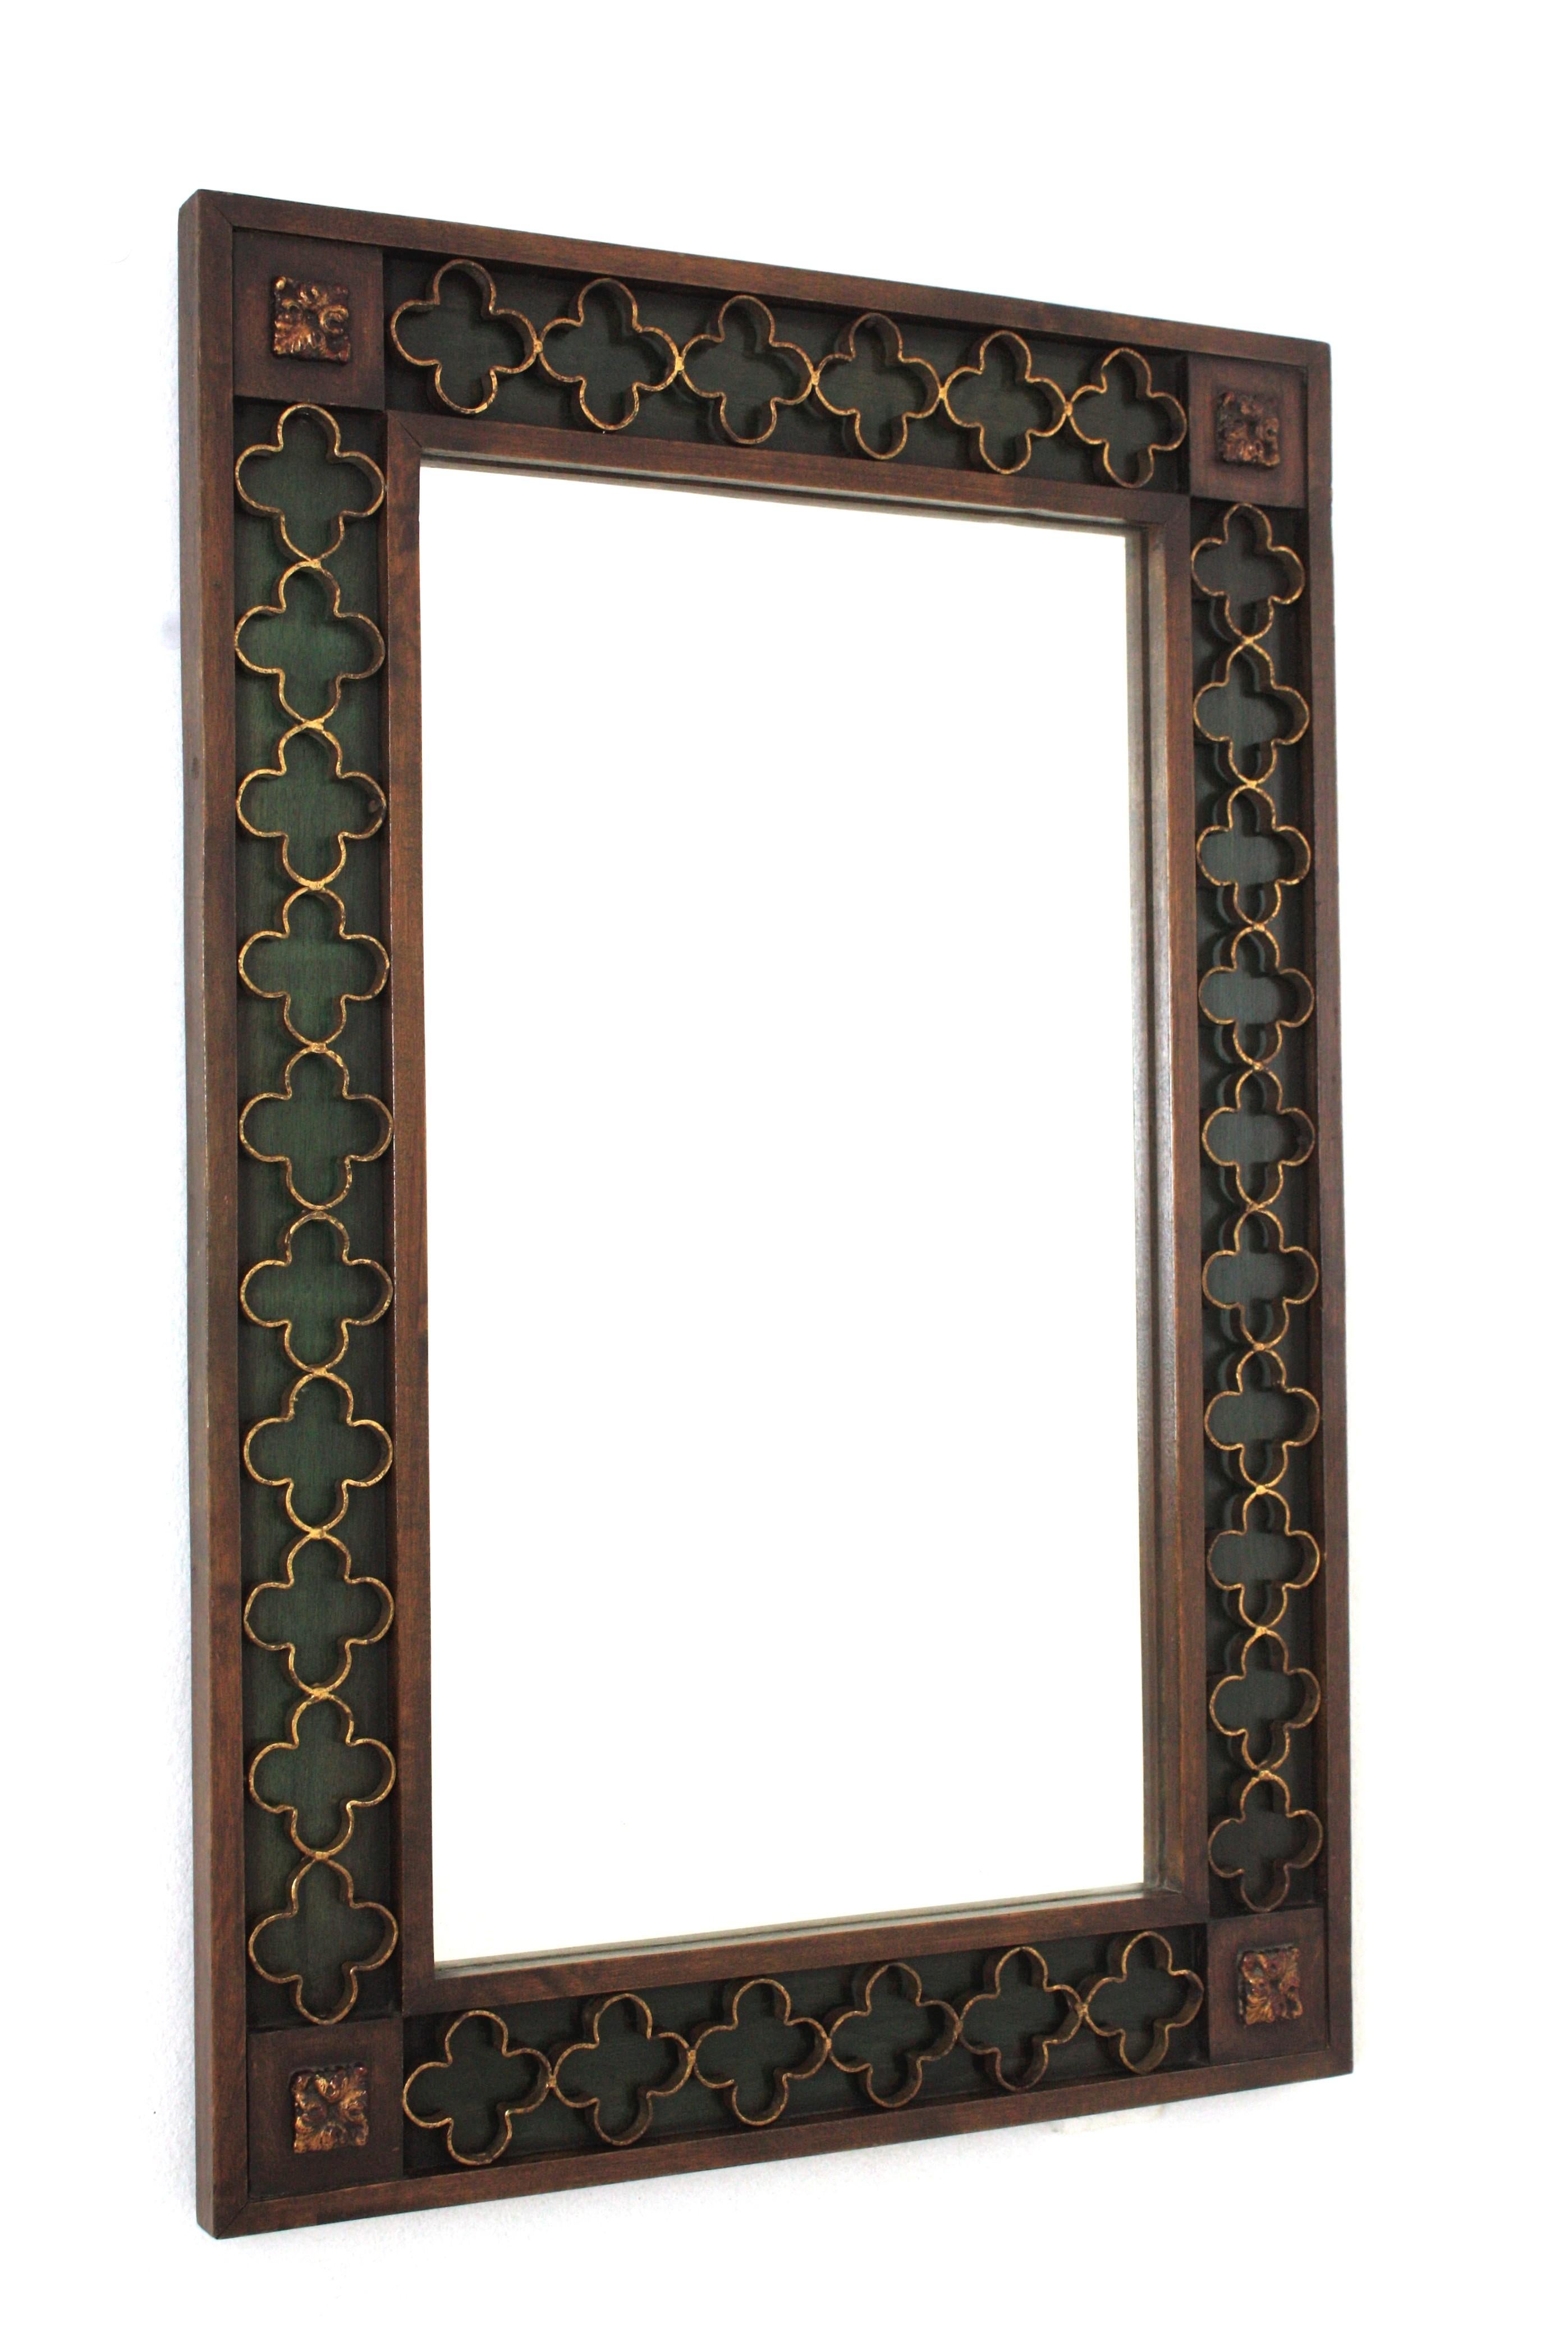 Rectangular Spanish Revival Mirror with Gilt Iron Rosettes, Spain, 1950-1960.
Beautiful rectangular frame with carving details on the corners. It has an inset frame with a green painted background and a decorative attached pattern of gilt wrought